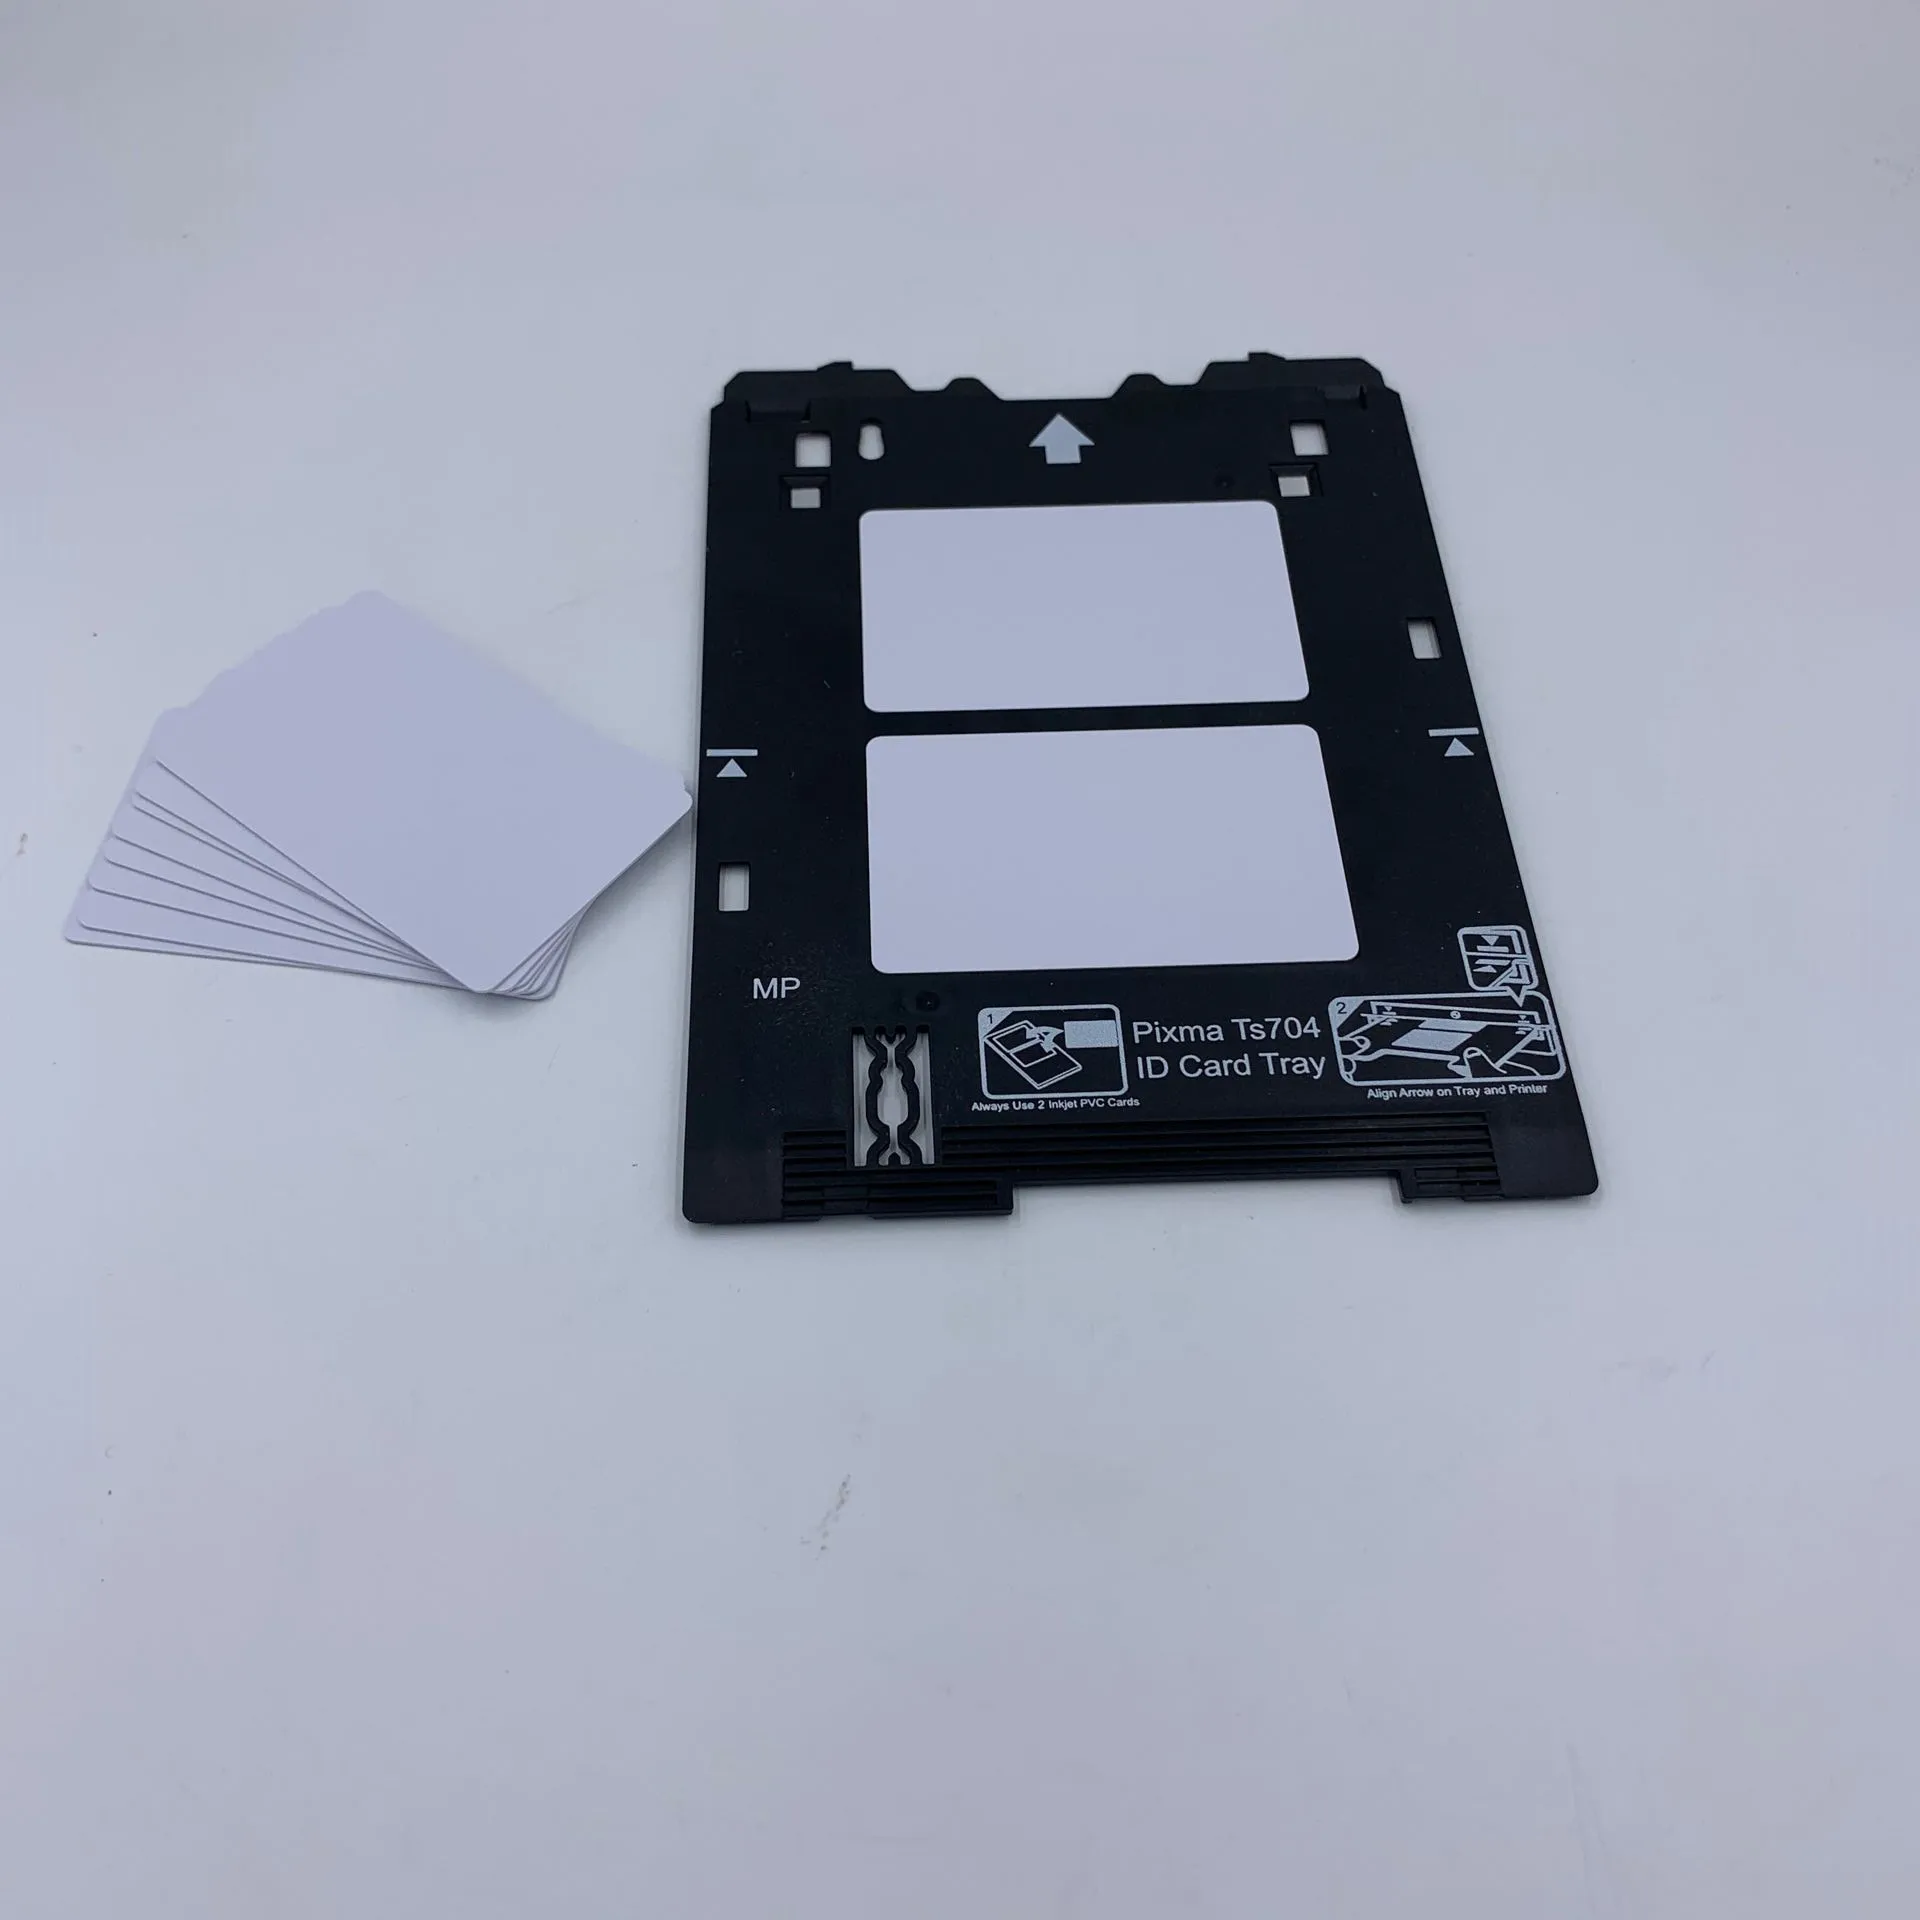 10 PVC Inkjet 4428 Chip Card 1 Plastic ID Card Tray for Epson R200 Printers 